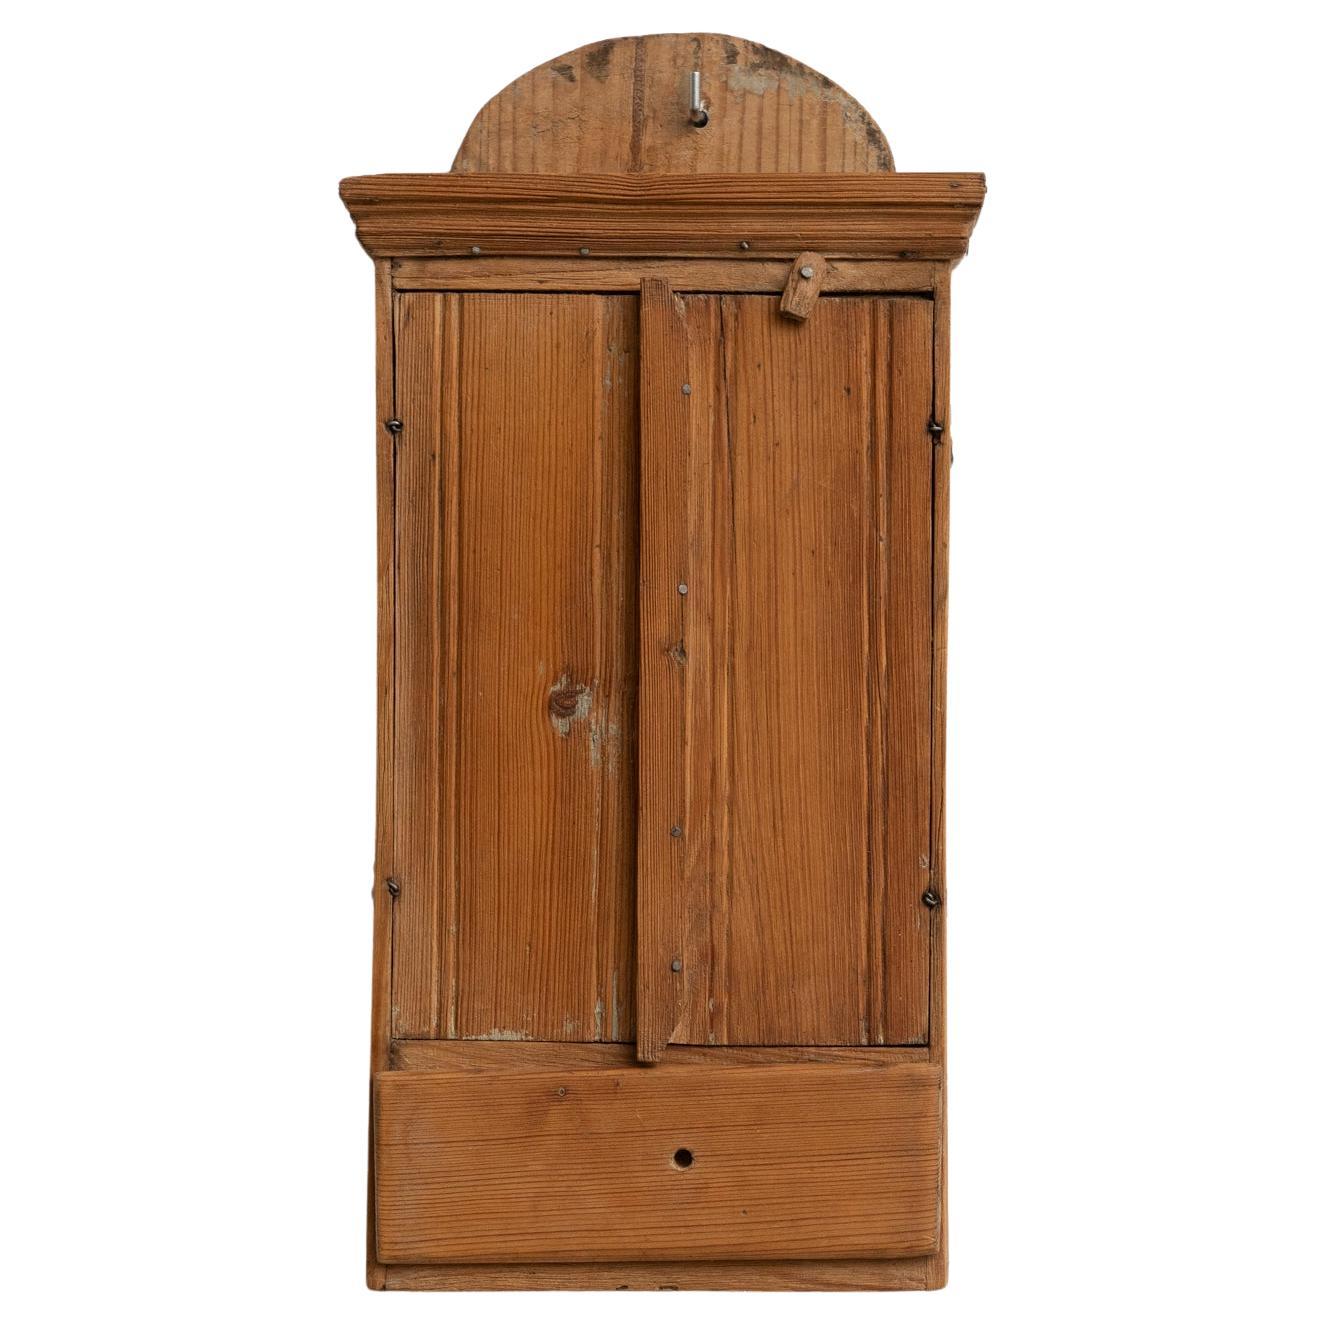 Early 20th Century Rustic Wood Small Wall Cabinet